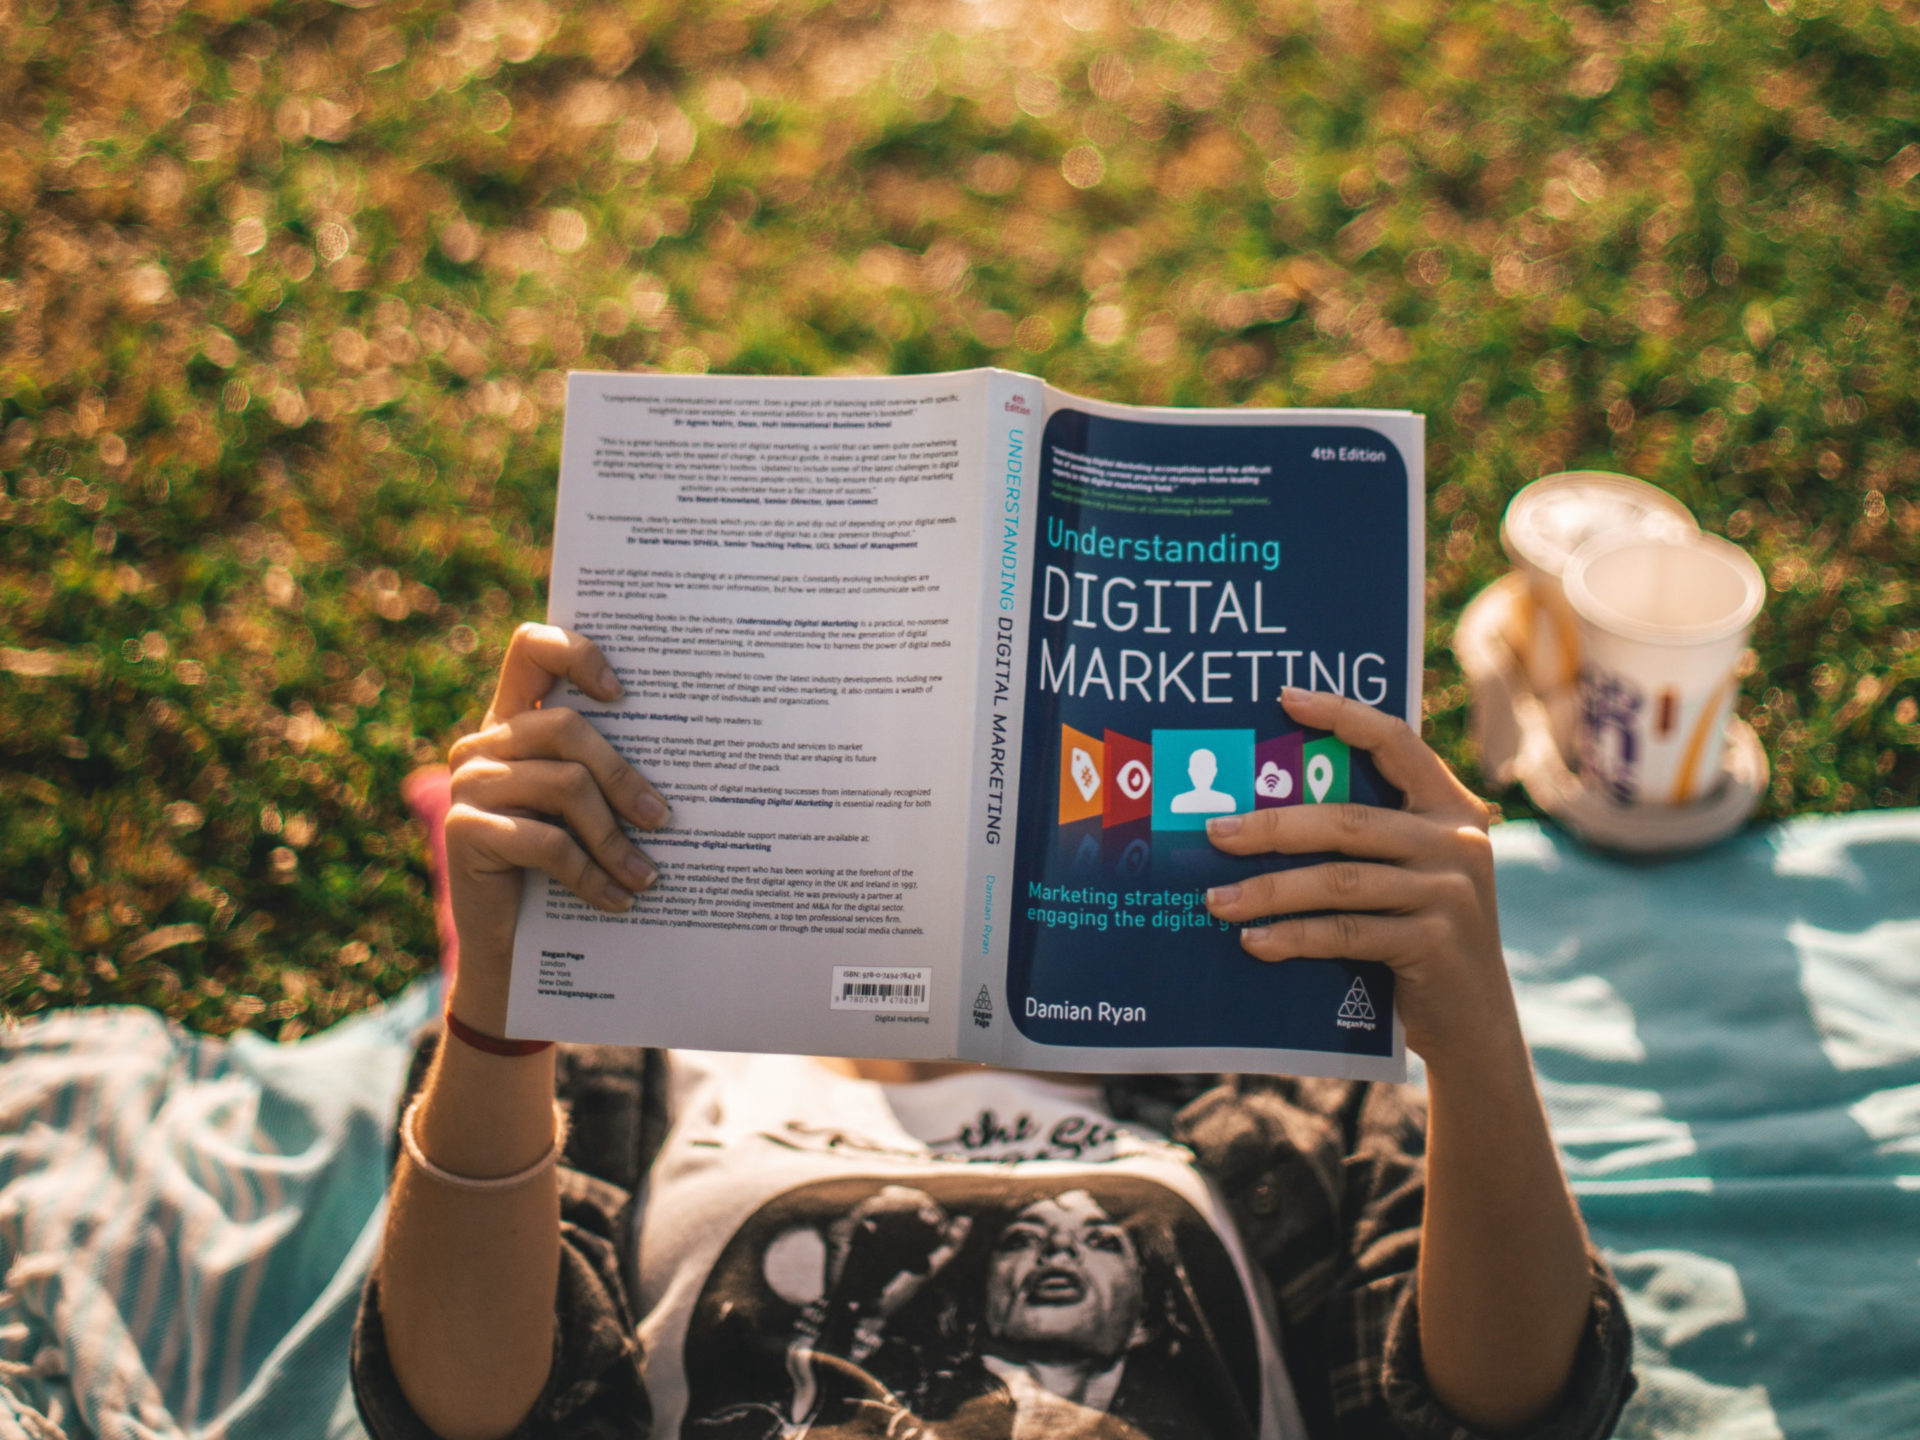 A person laying on a blanket in some grass, reading a book with the title "digital marketing"